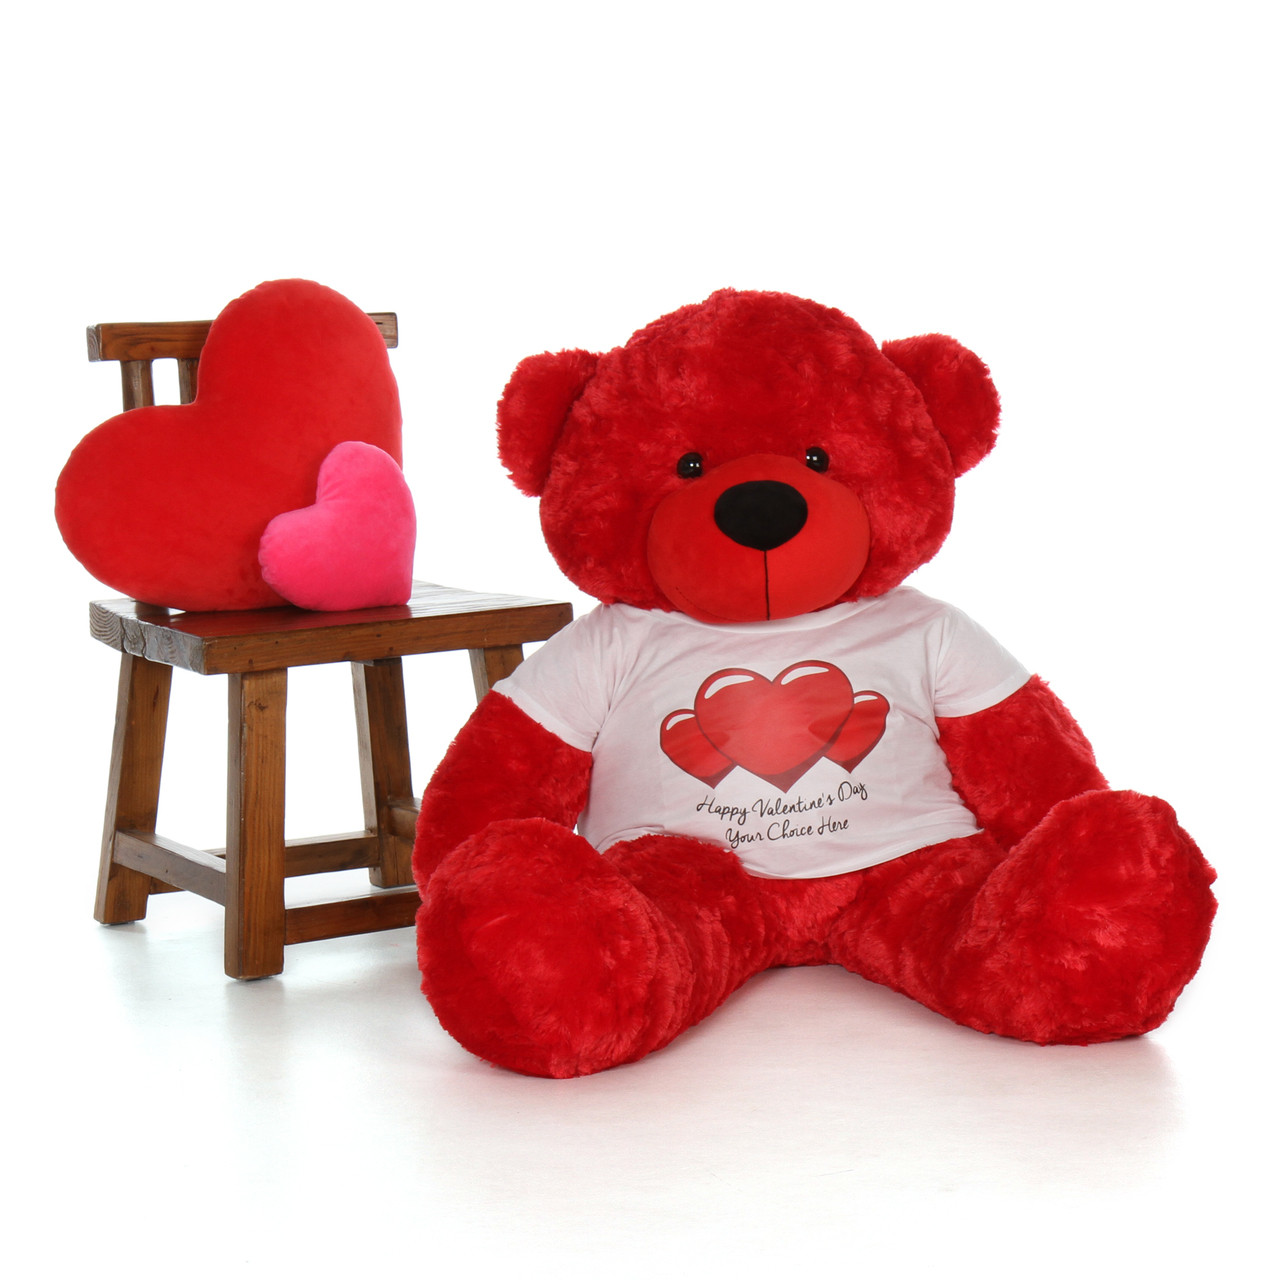 4ft Life Size Teddy Bear wearing customizable Red Heart Happy Valentine’s Day shirt ...1280 x 1280